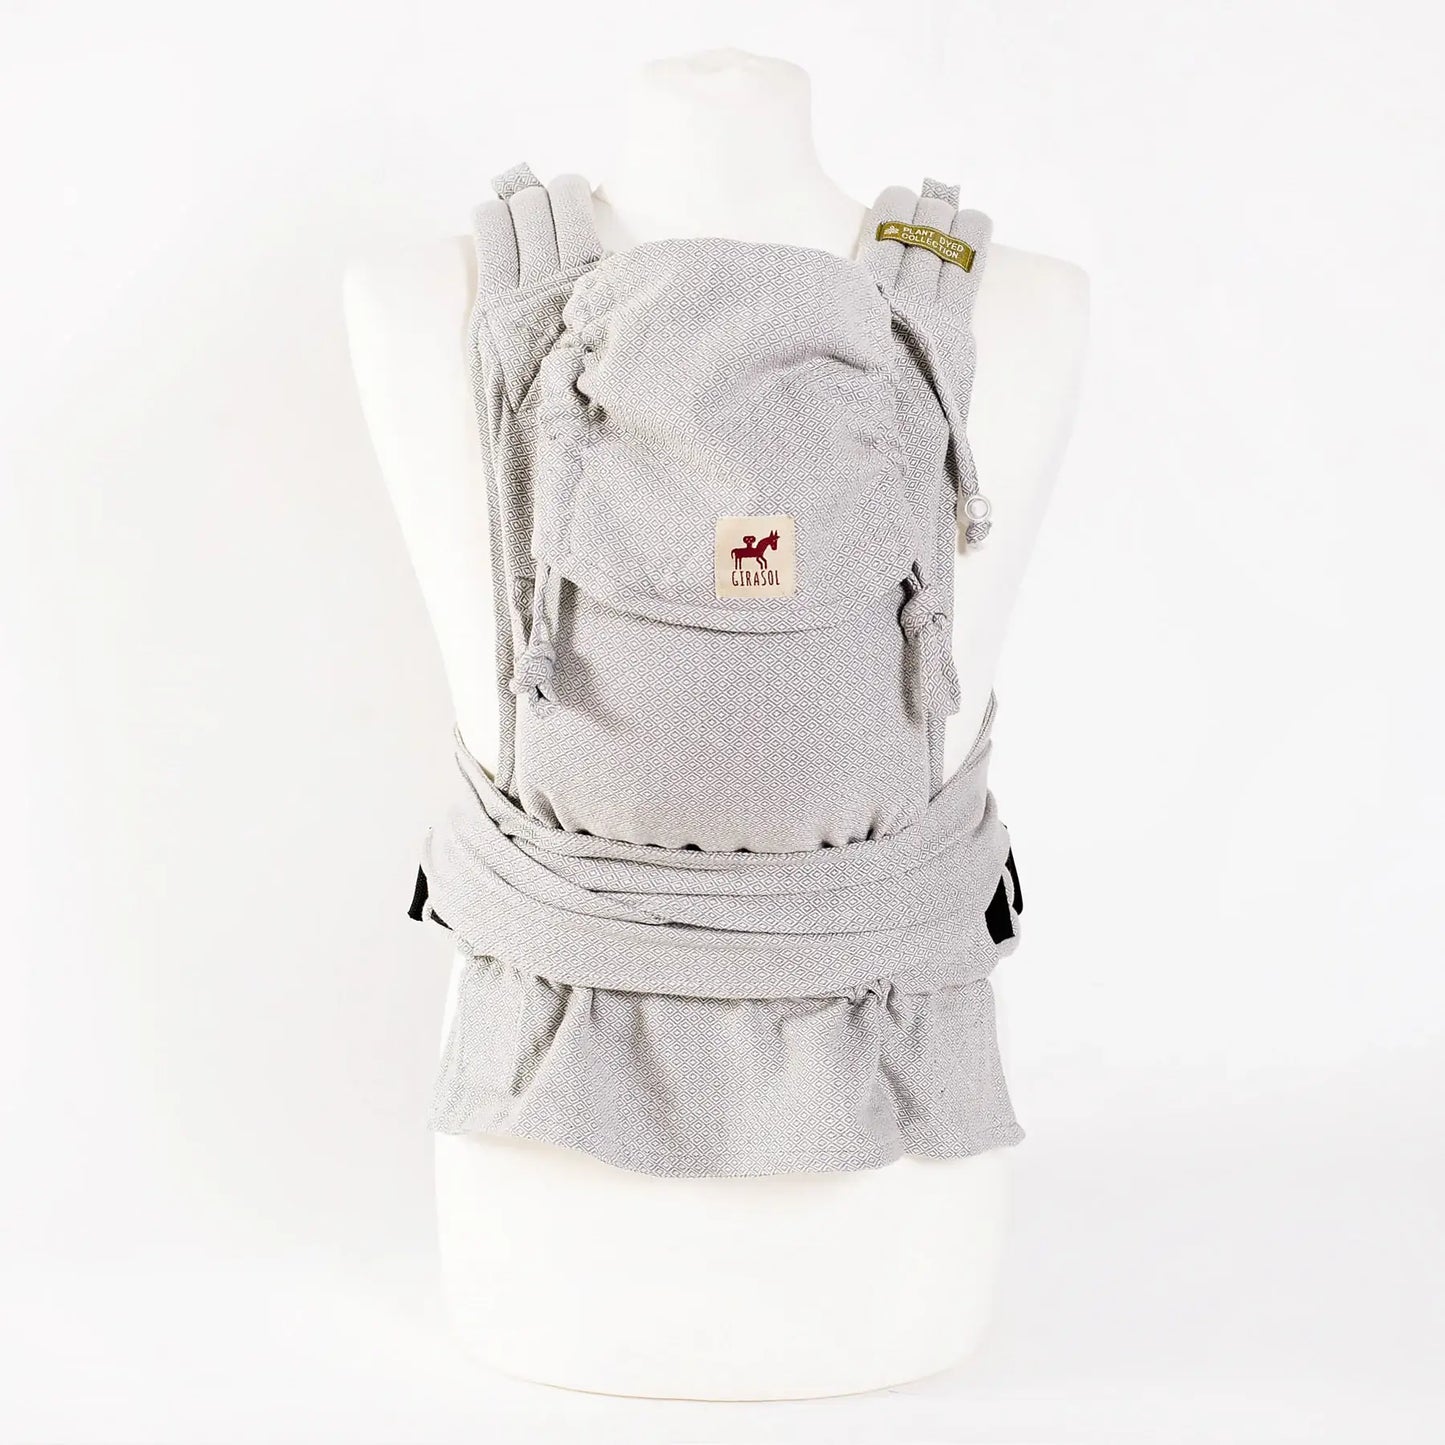 MySol Plant Dyed Palo Campeche baby carrier, eco, sustainable -  Available to pre order